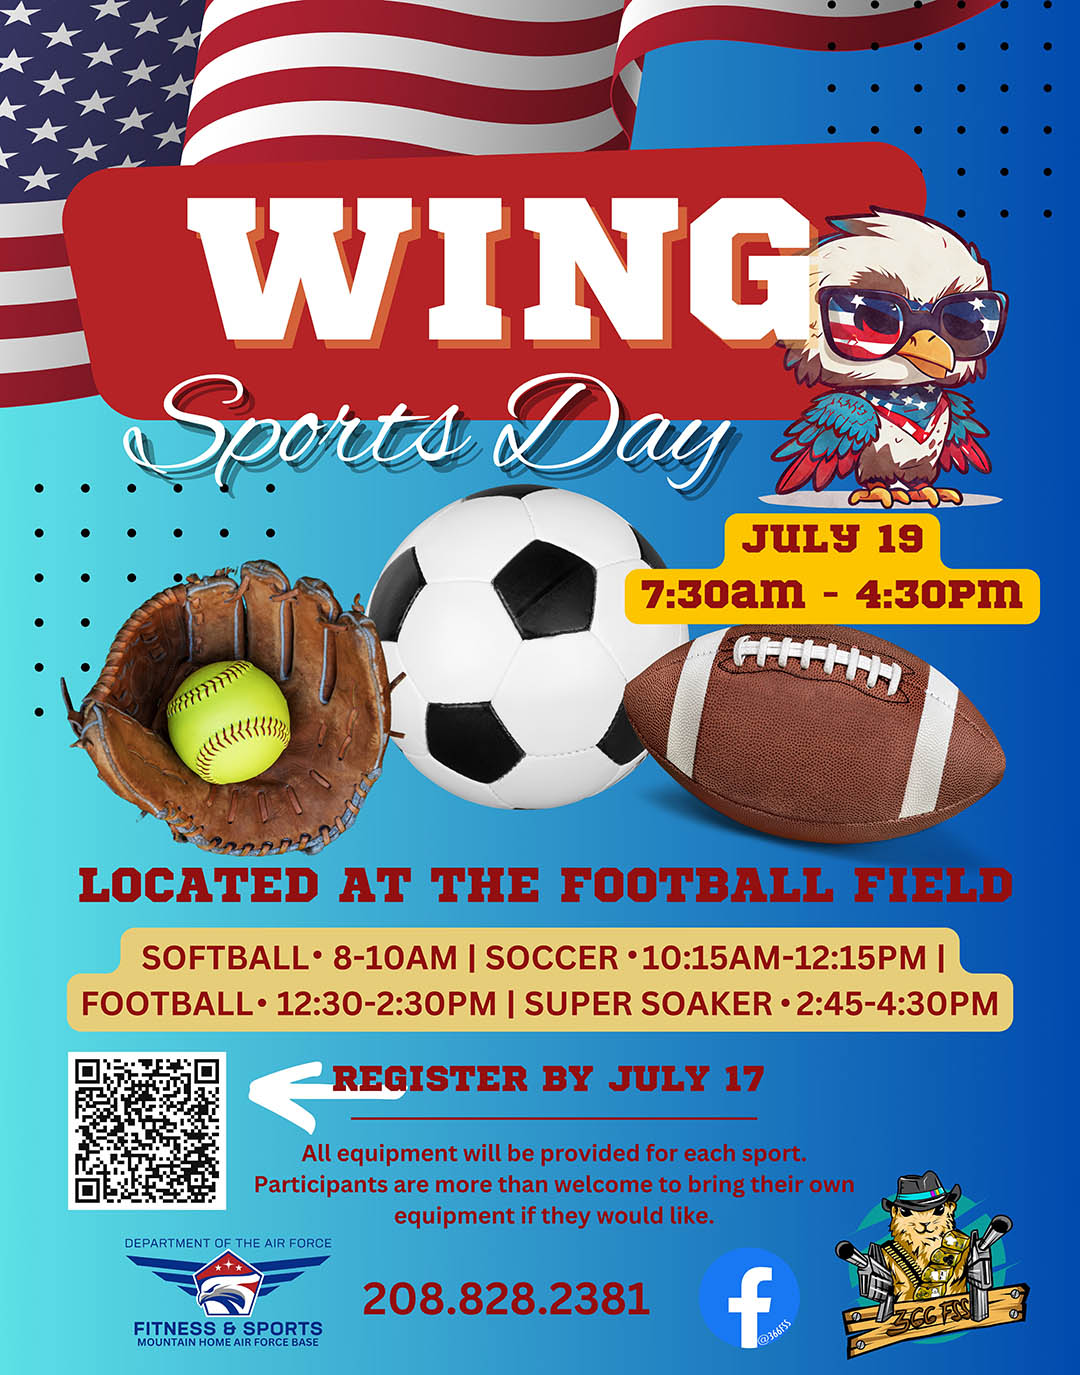 Wing Sports Day